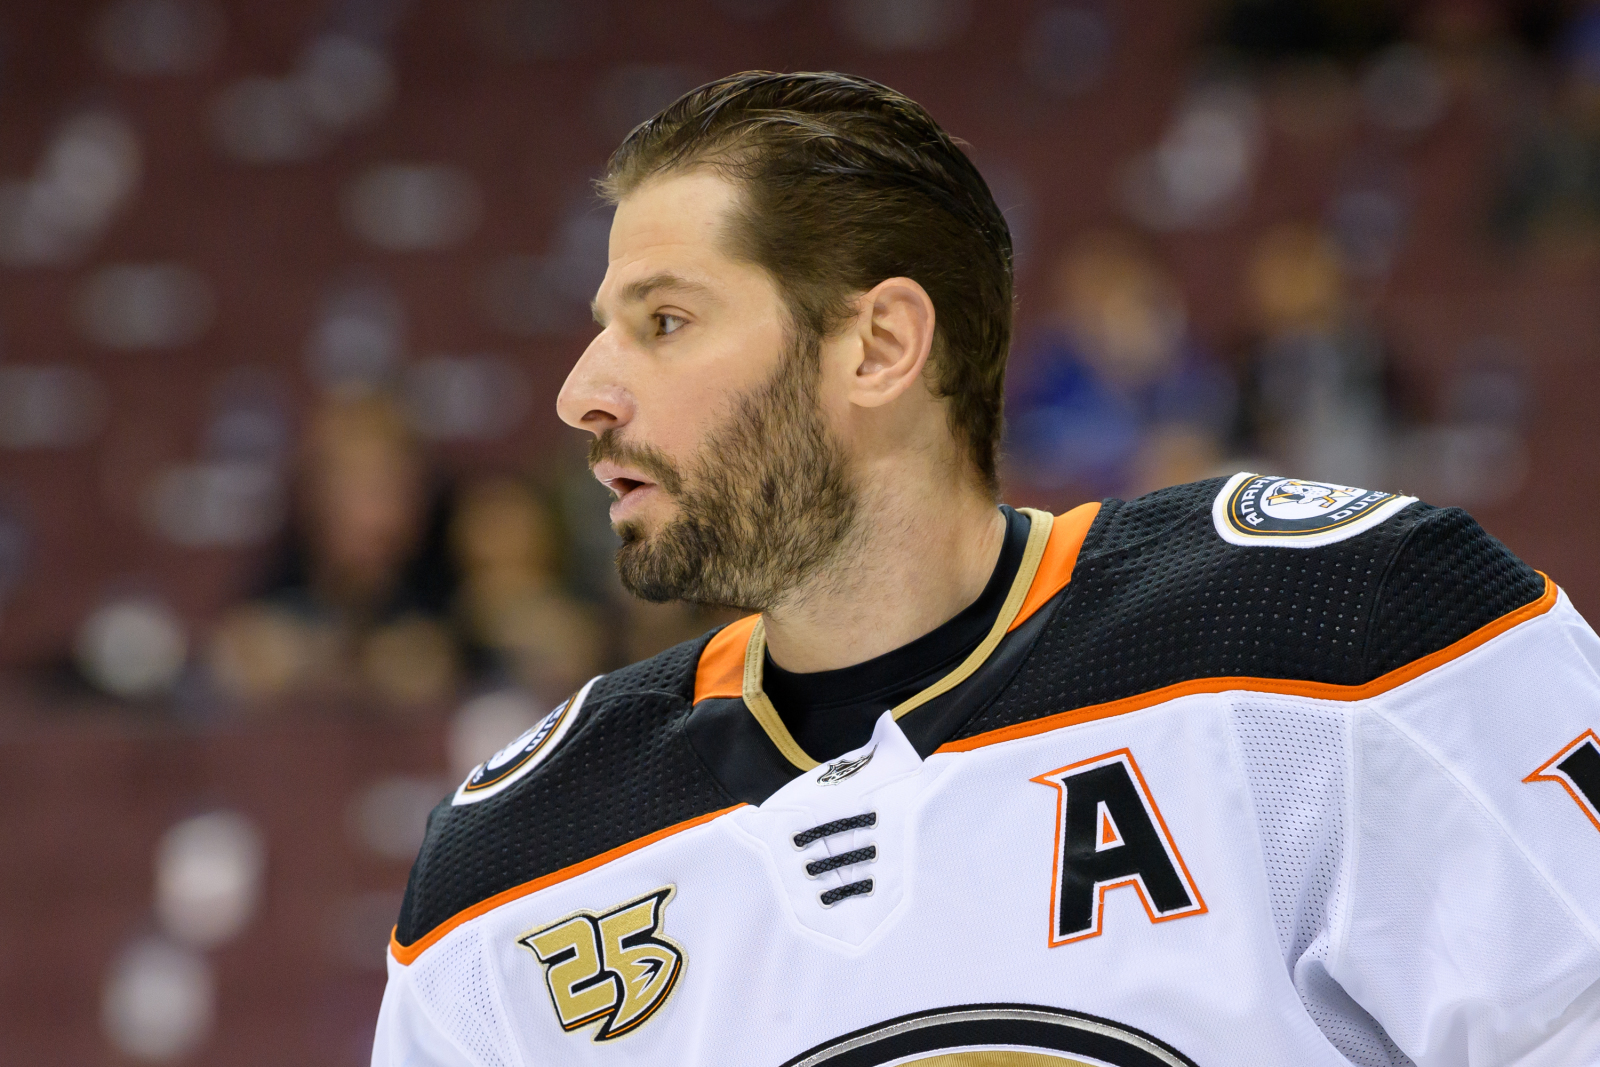 See Ryan Kesler in the brand new Anaheim Ducks jersey for the first time -  The Hockey News